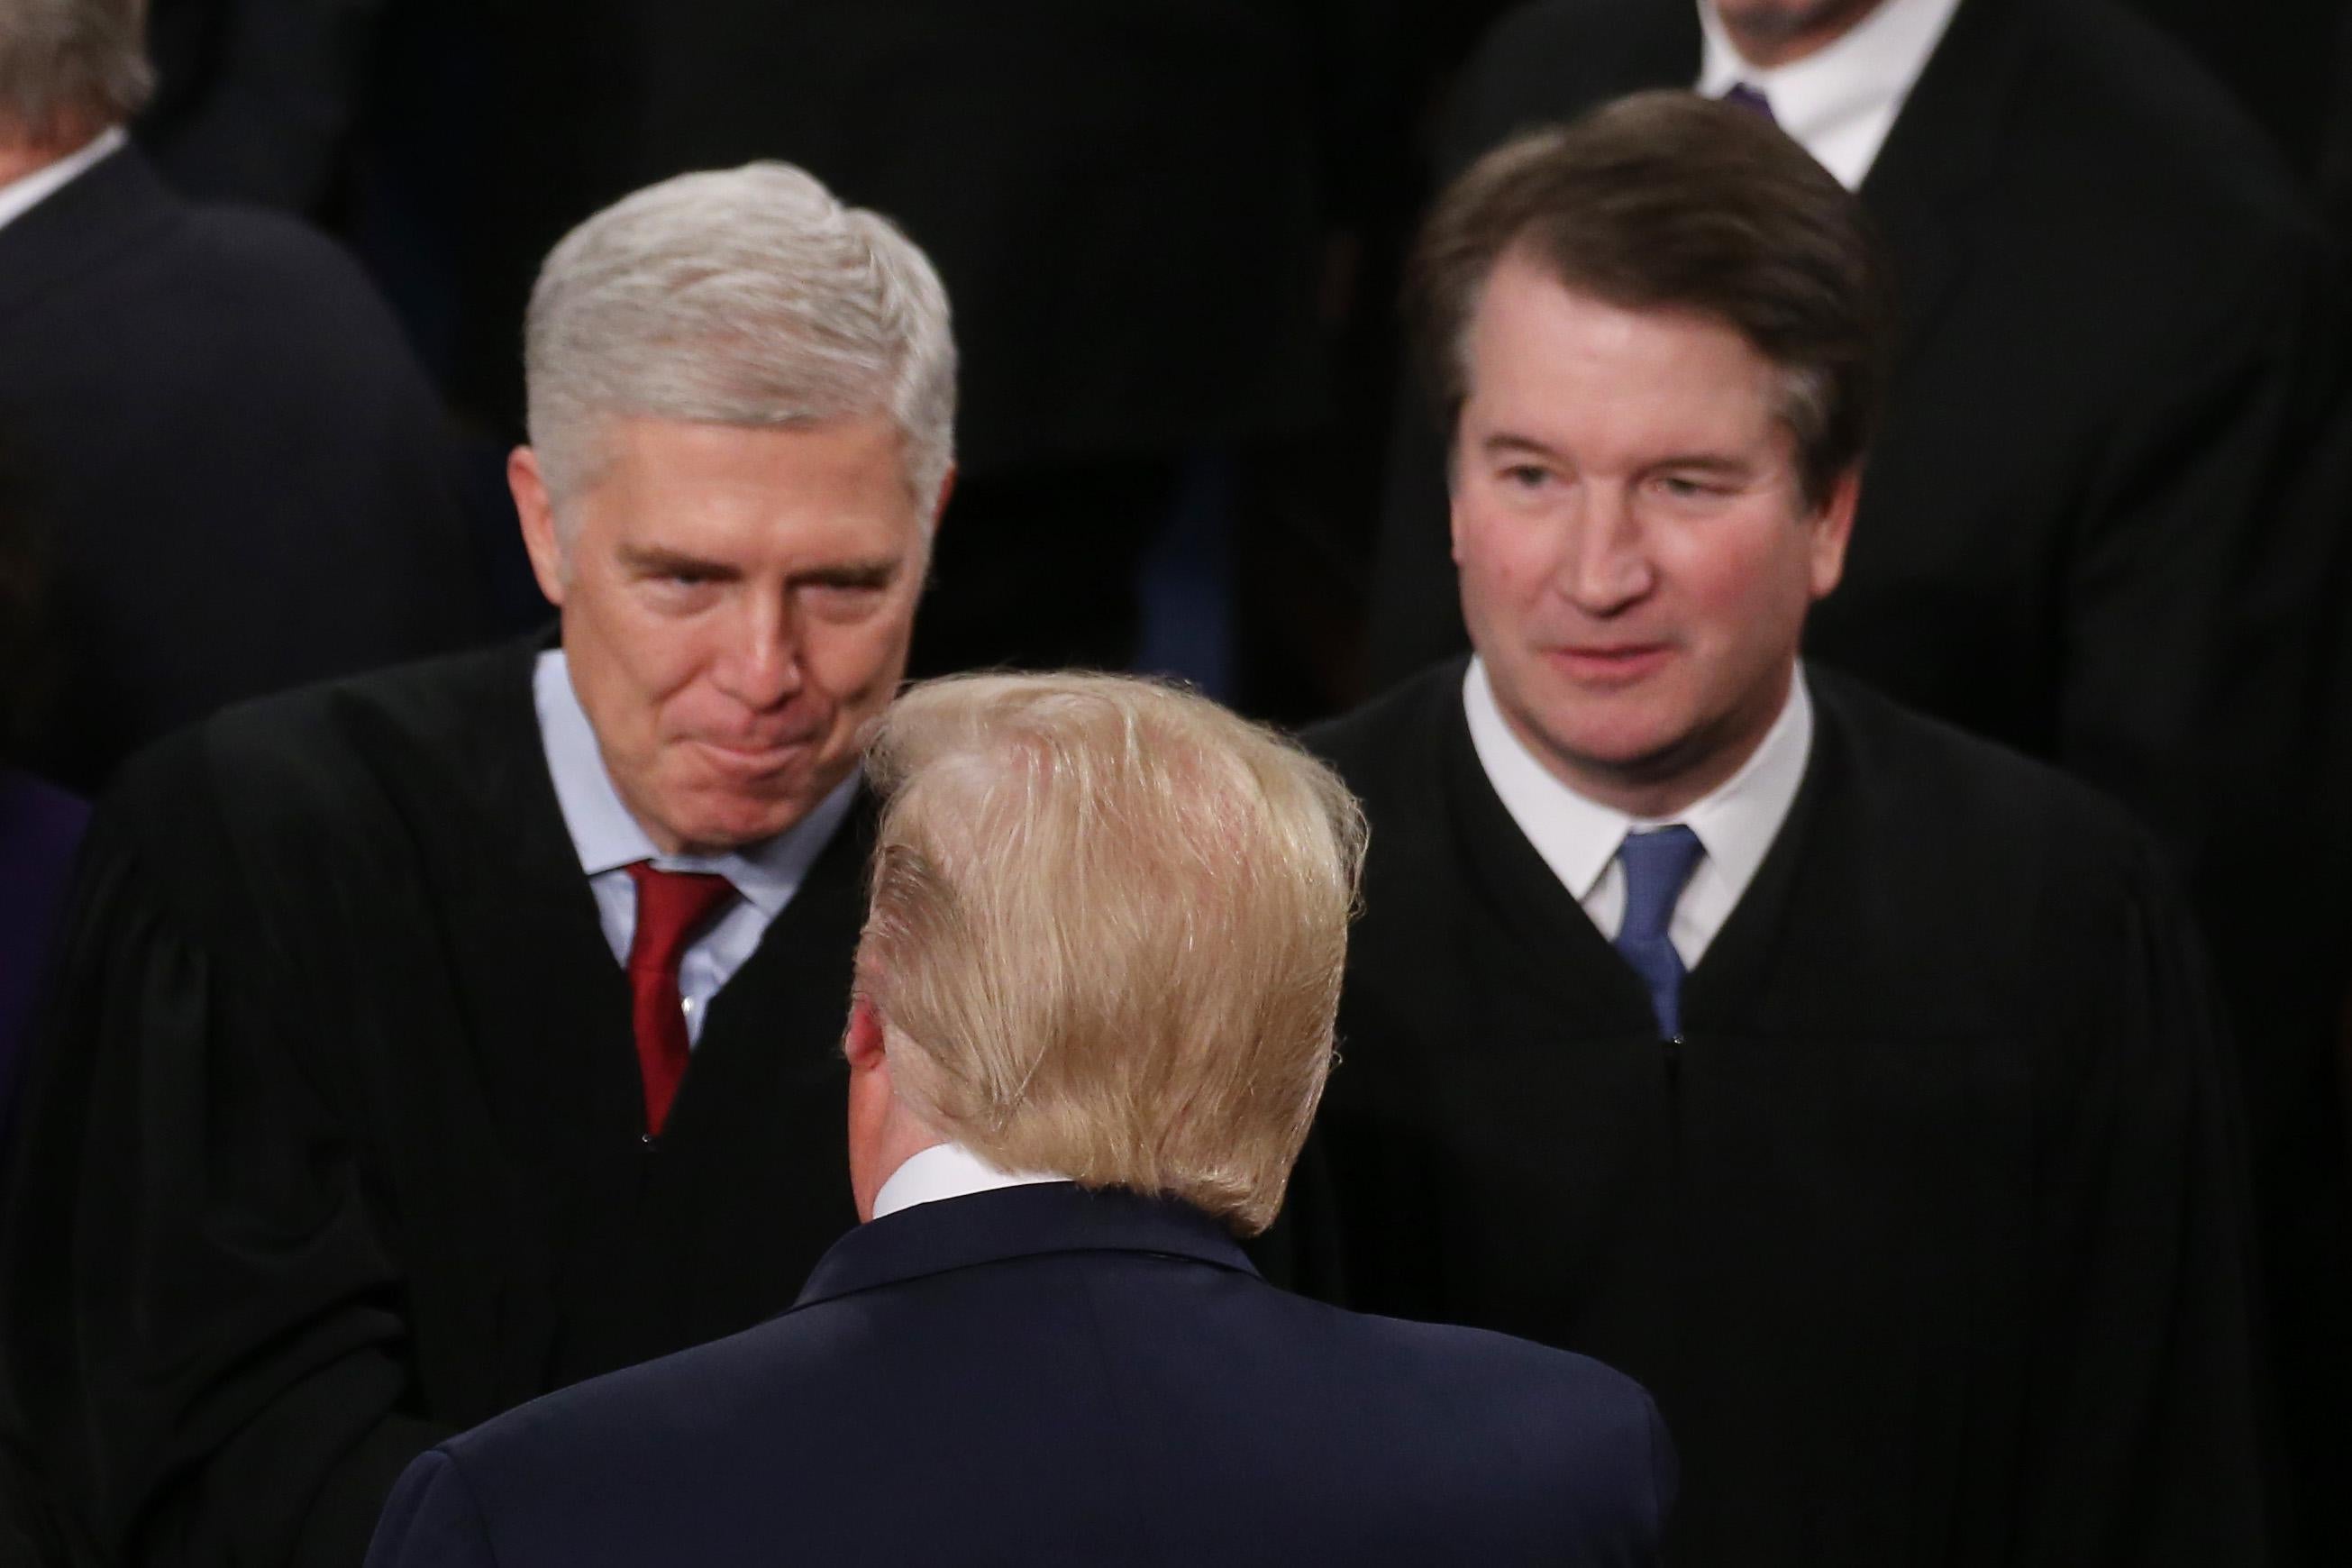 Trump, seen from behind, greets Gorsuch as Kavanaugh looks on